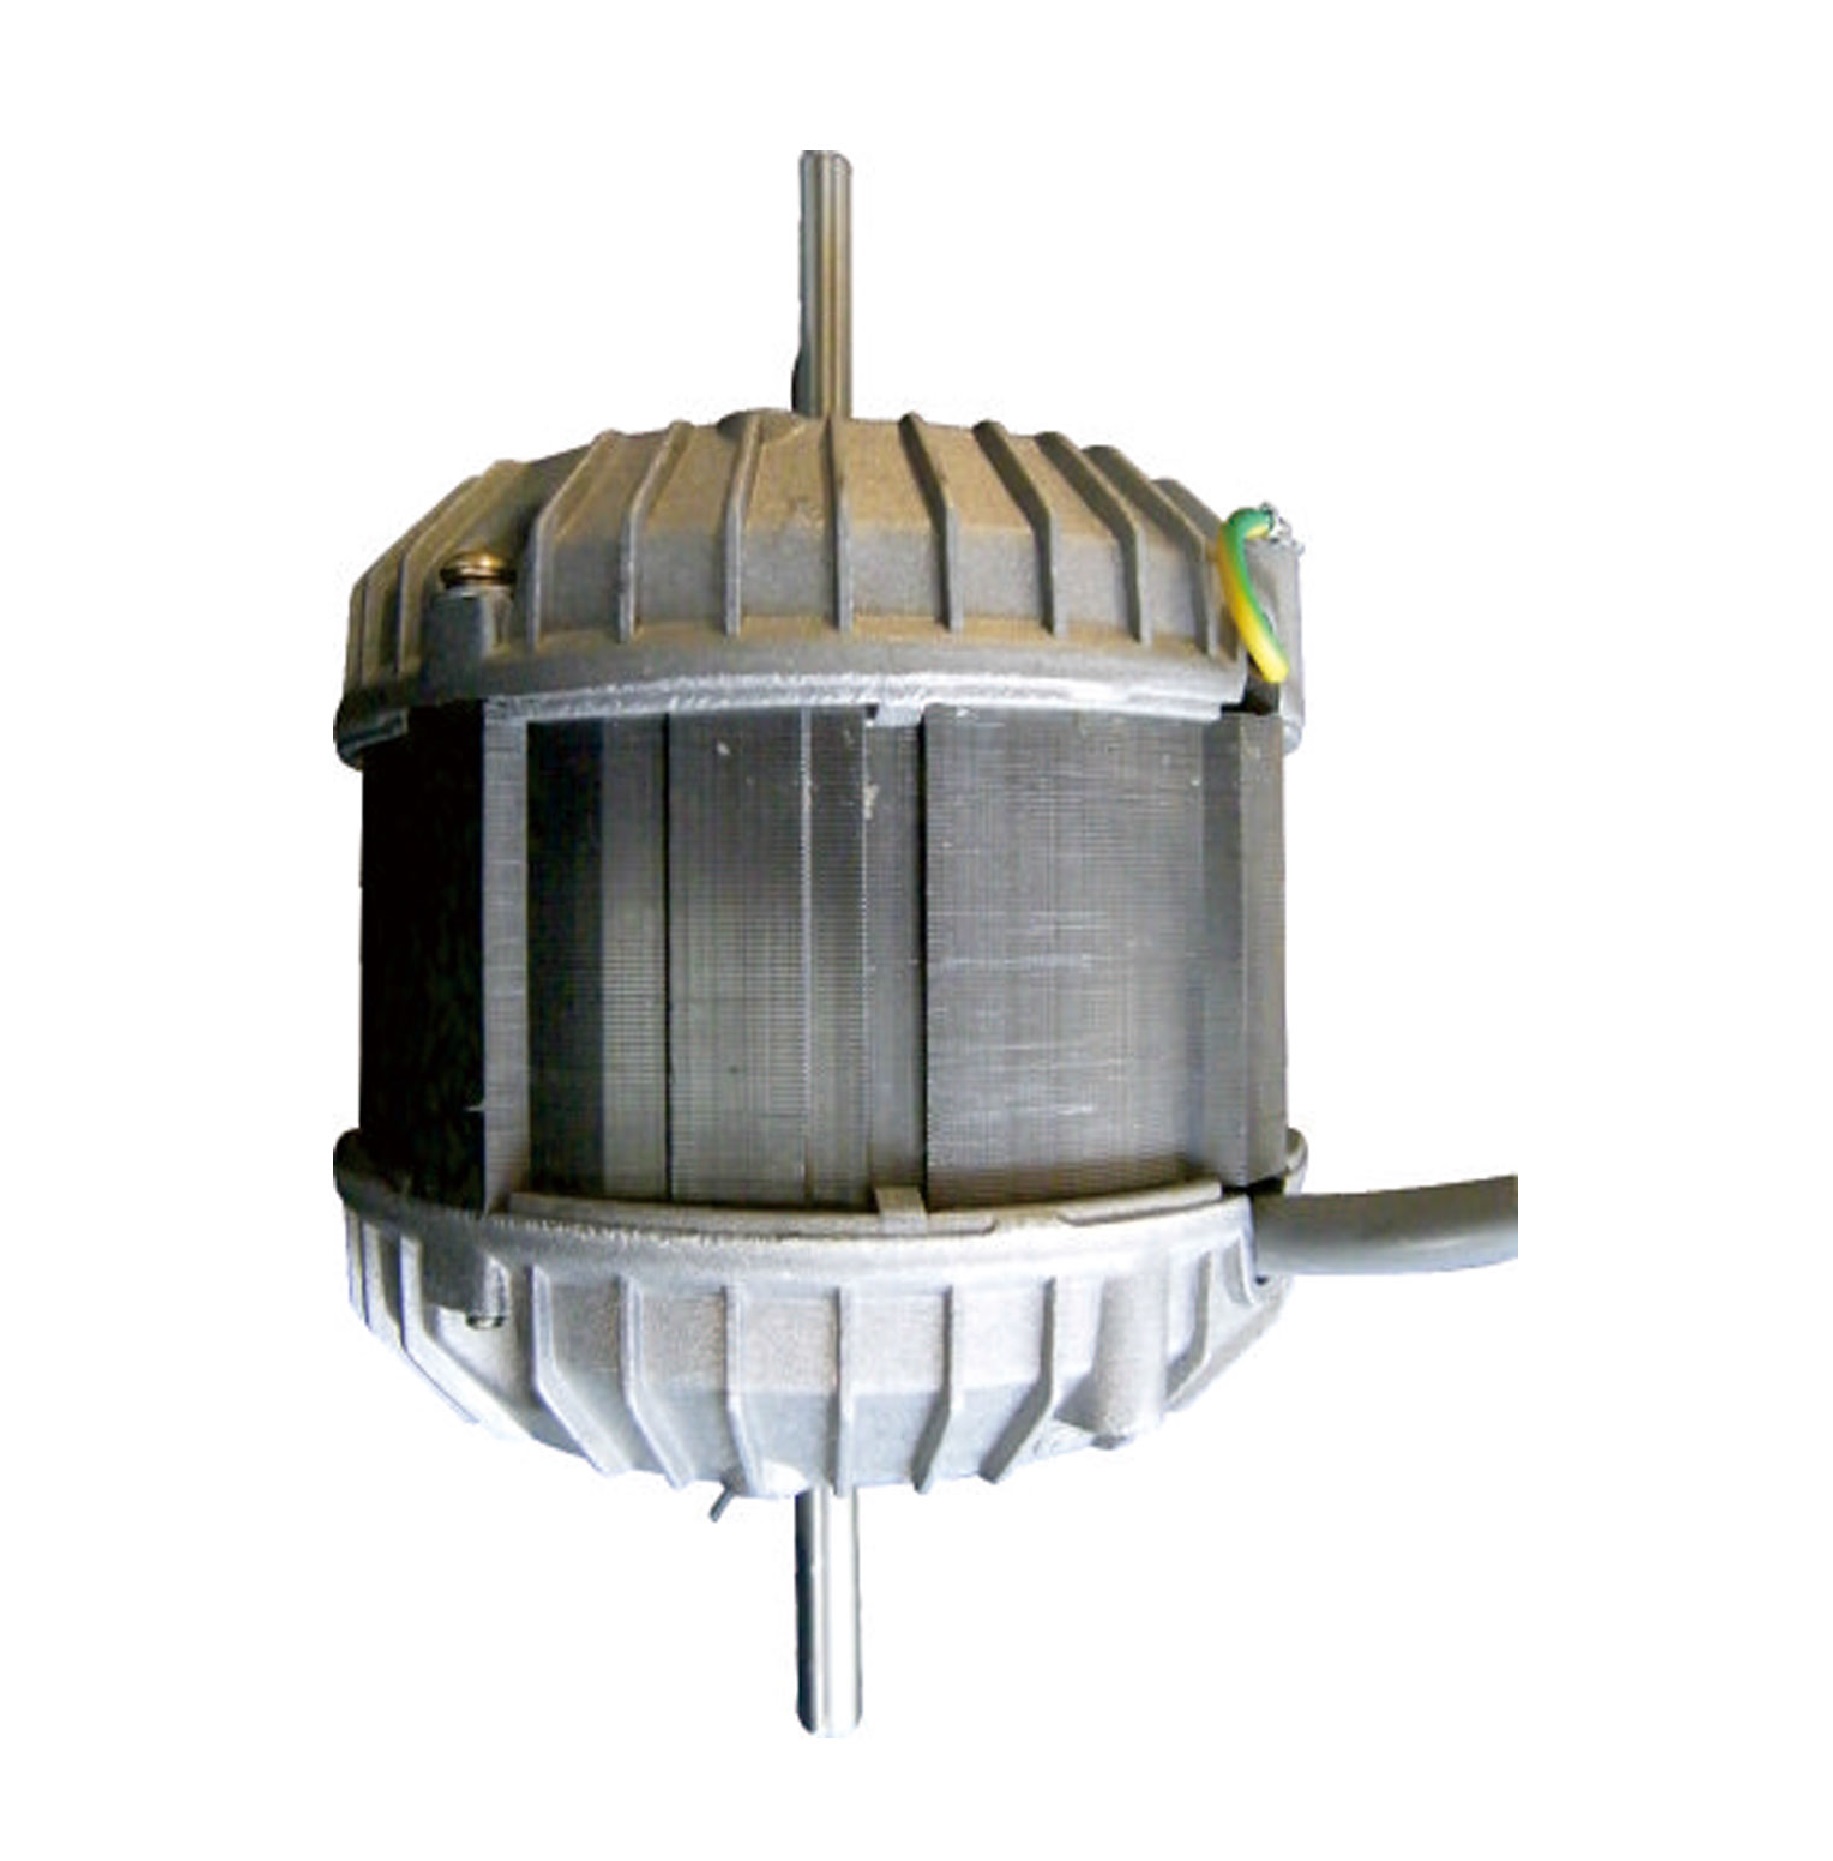 96 Shaded Pole Motor for Range Hood/Air Conditioner